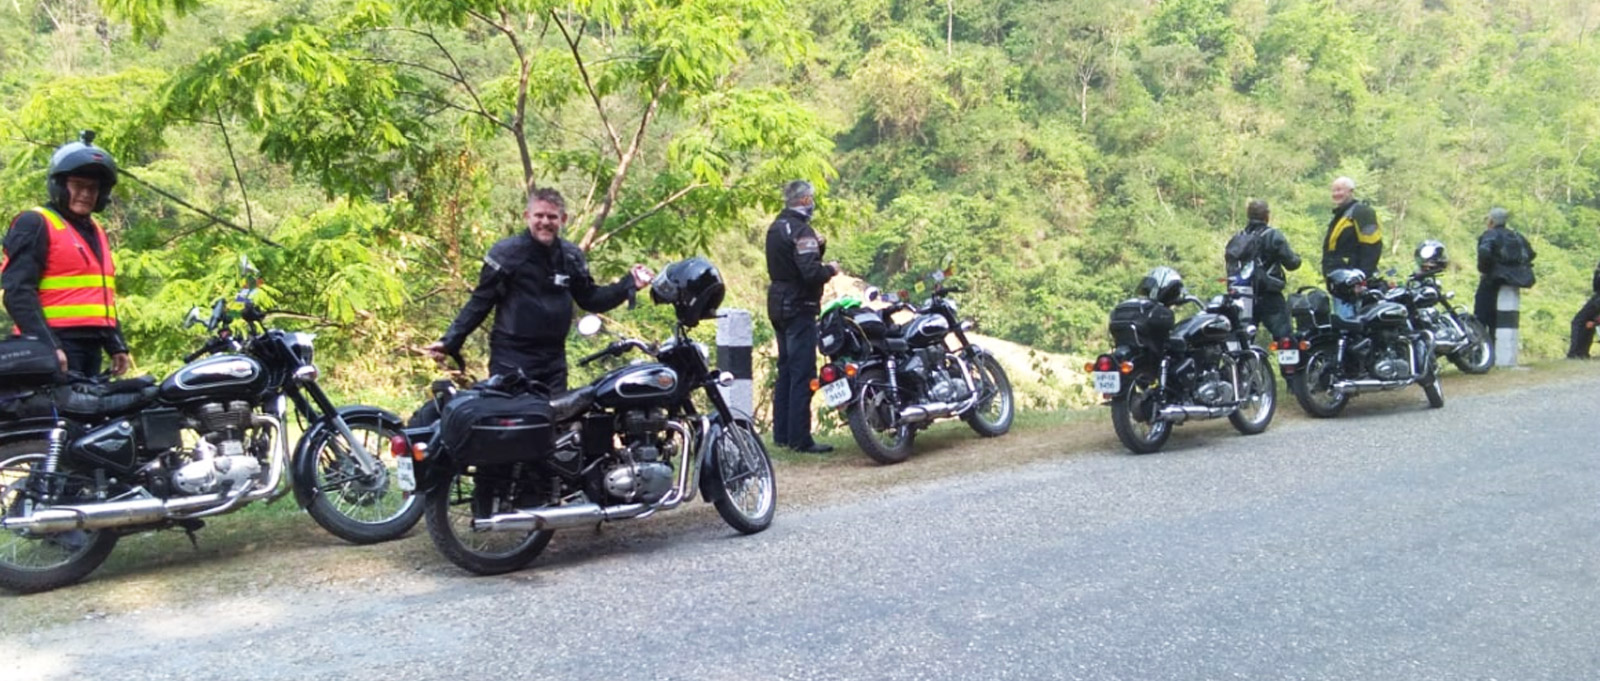 Best guided motorcycle tours in india on Royal Enfield, Enjoy Bike trip ...